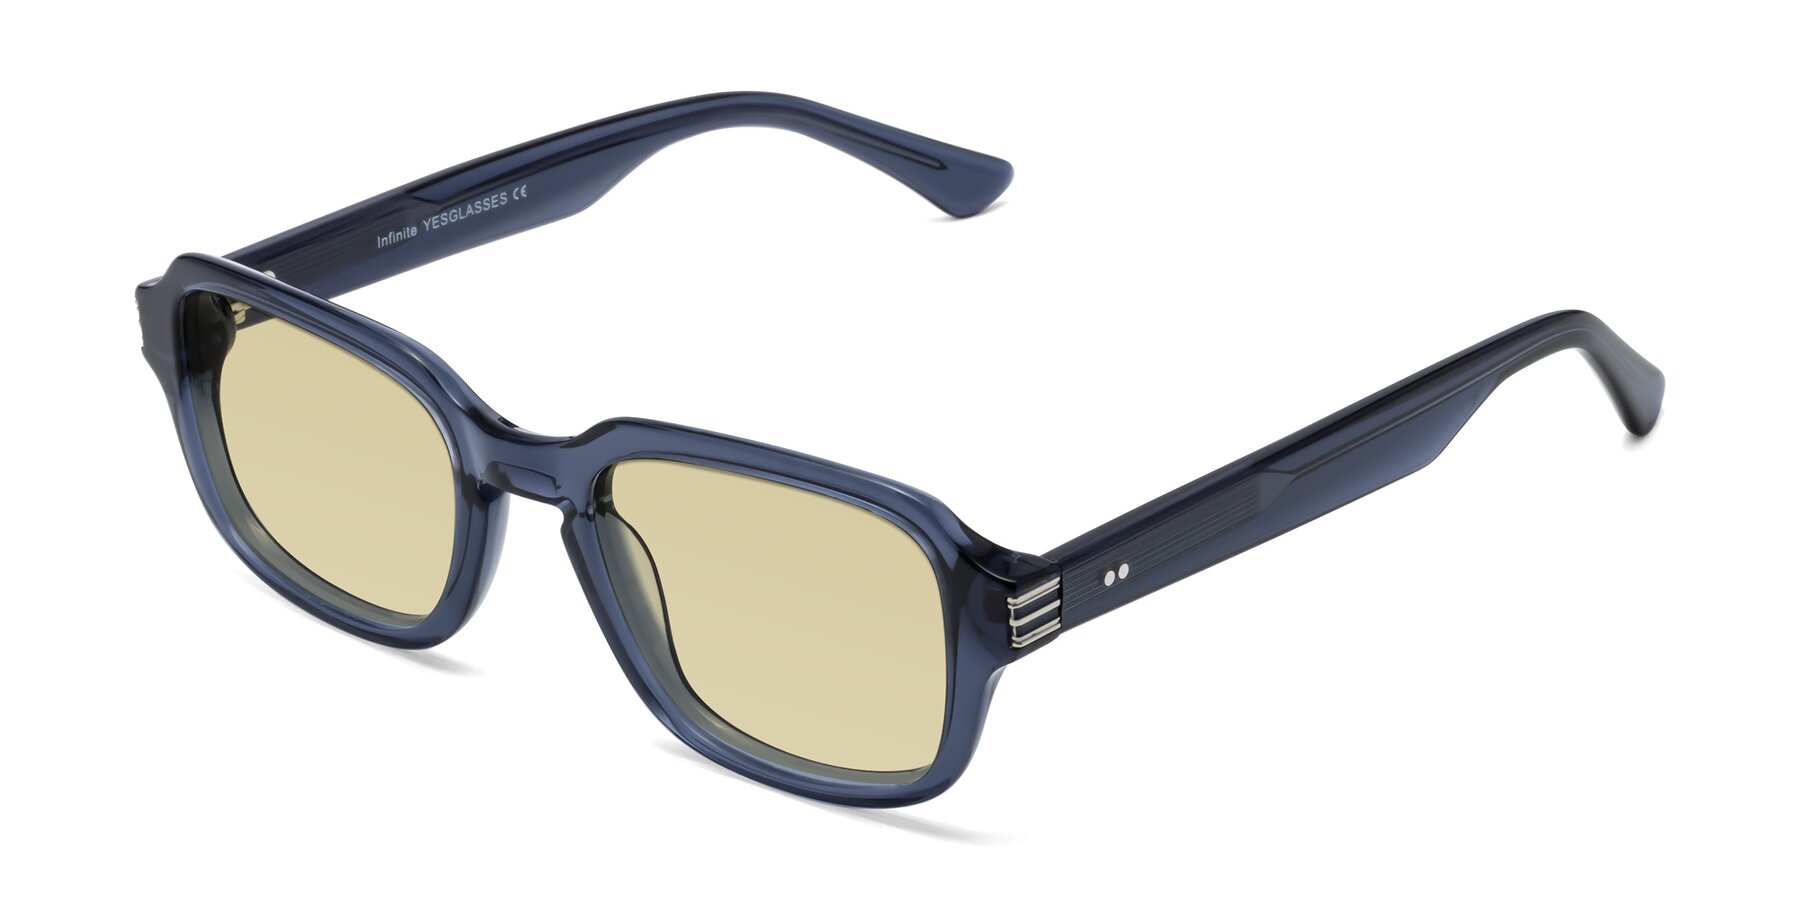 Angle of Infinite in Dark Blue with Light Champagne Tinted Lenses